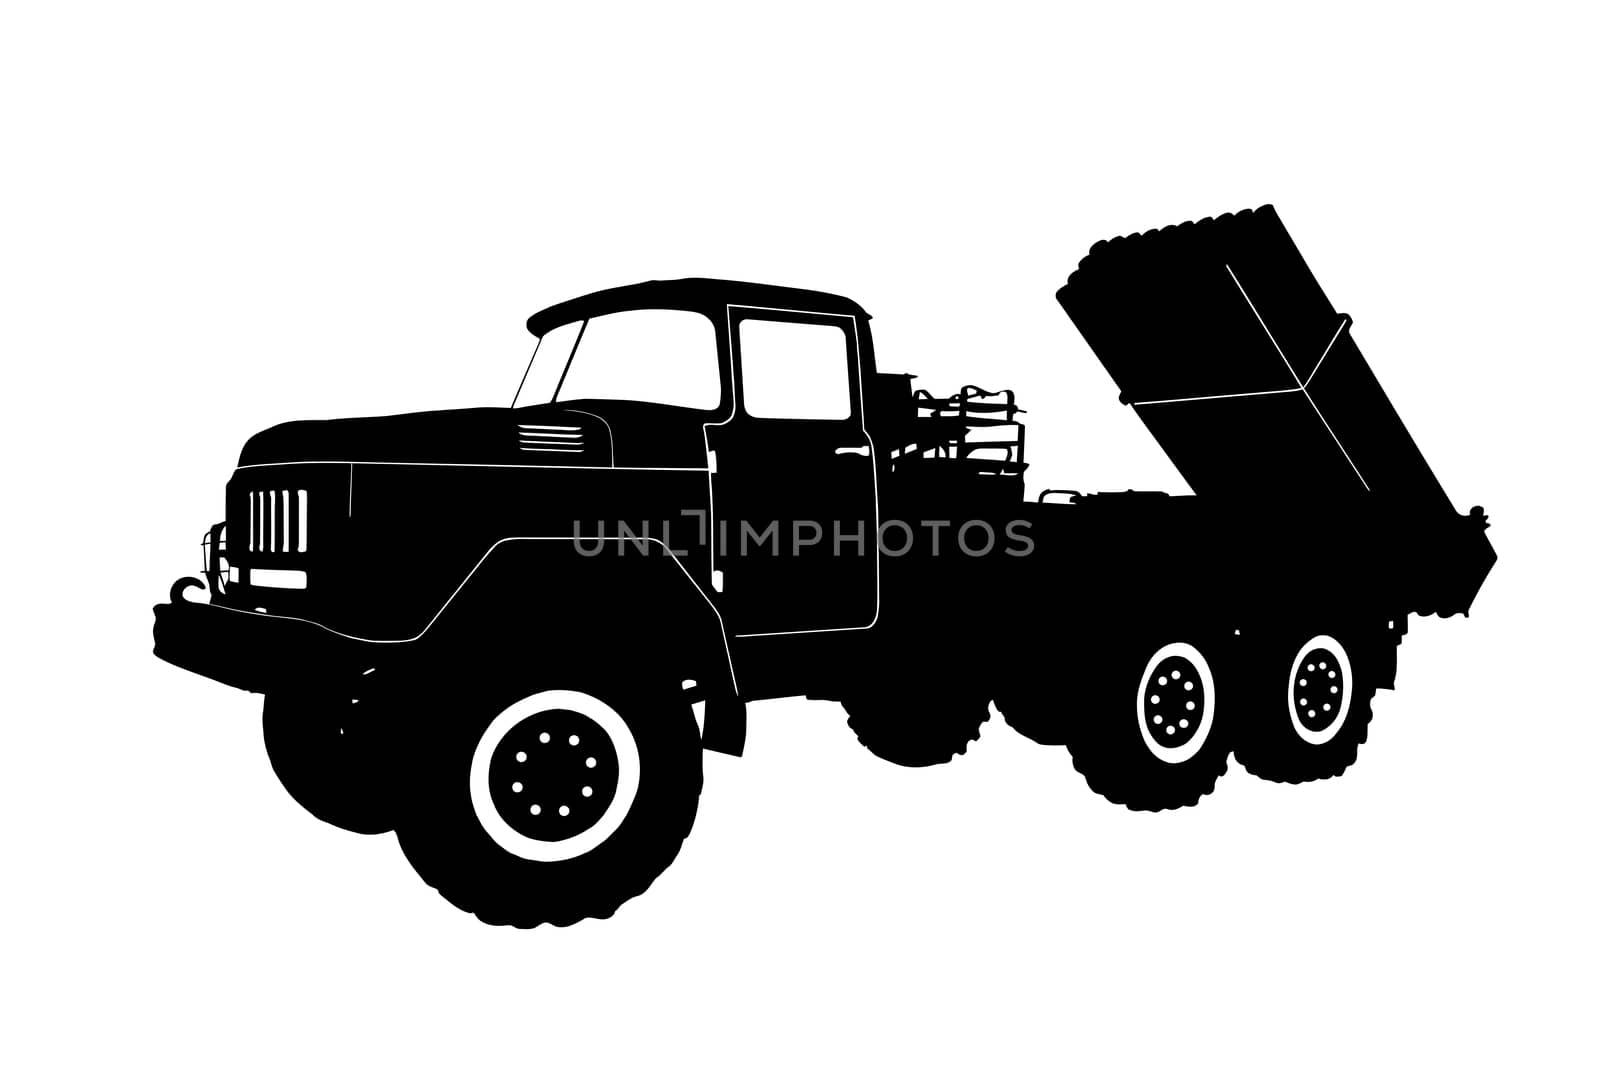 Silhouette of the military machine, multiple rocket launchers, isolated on a white background.